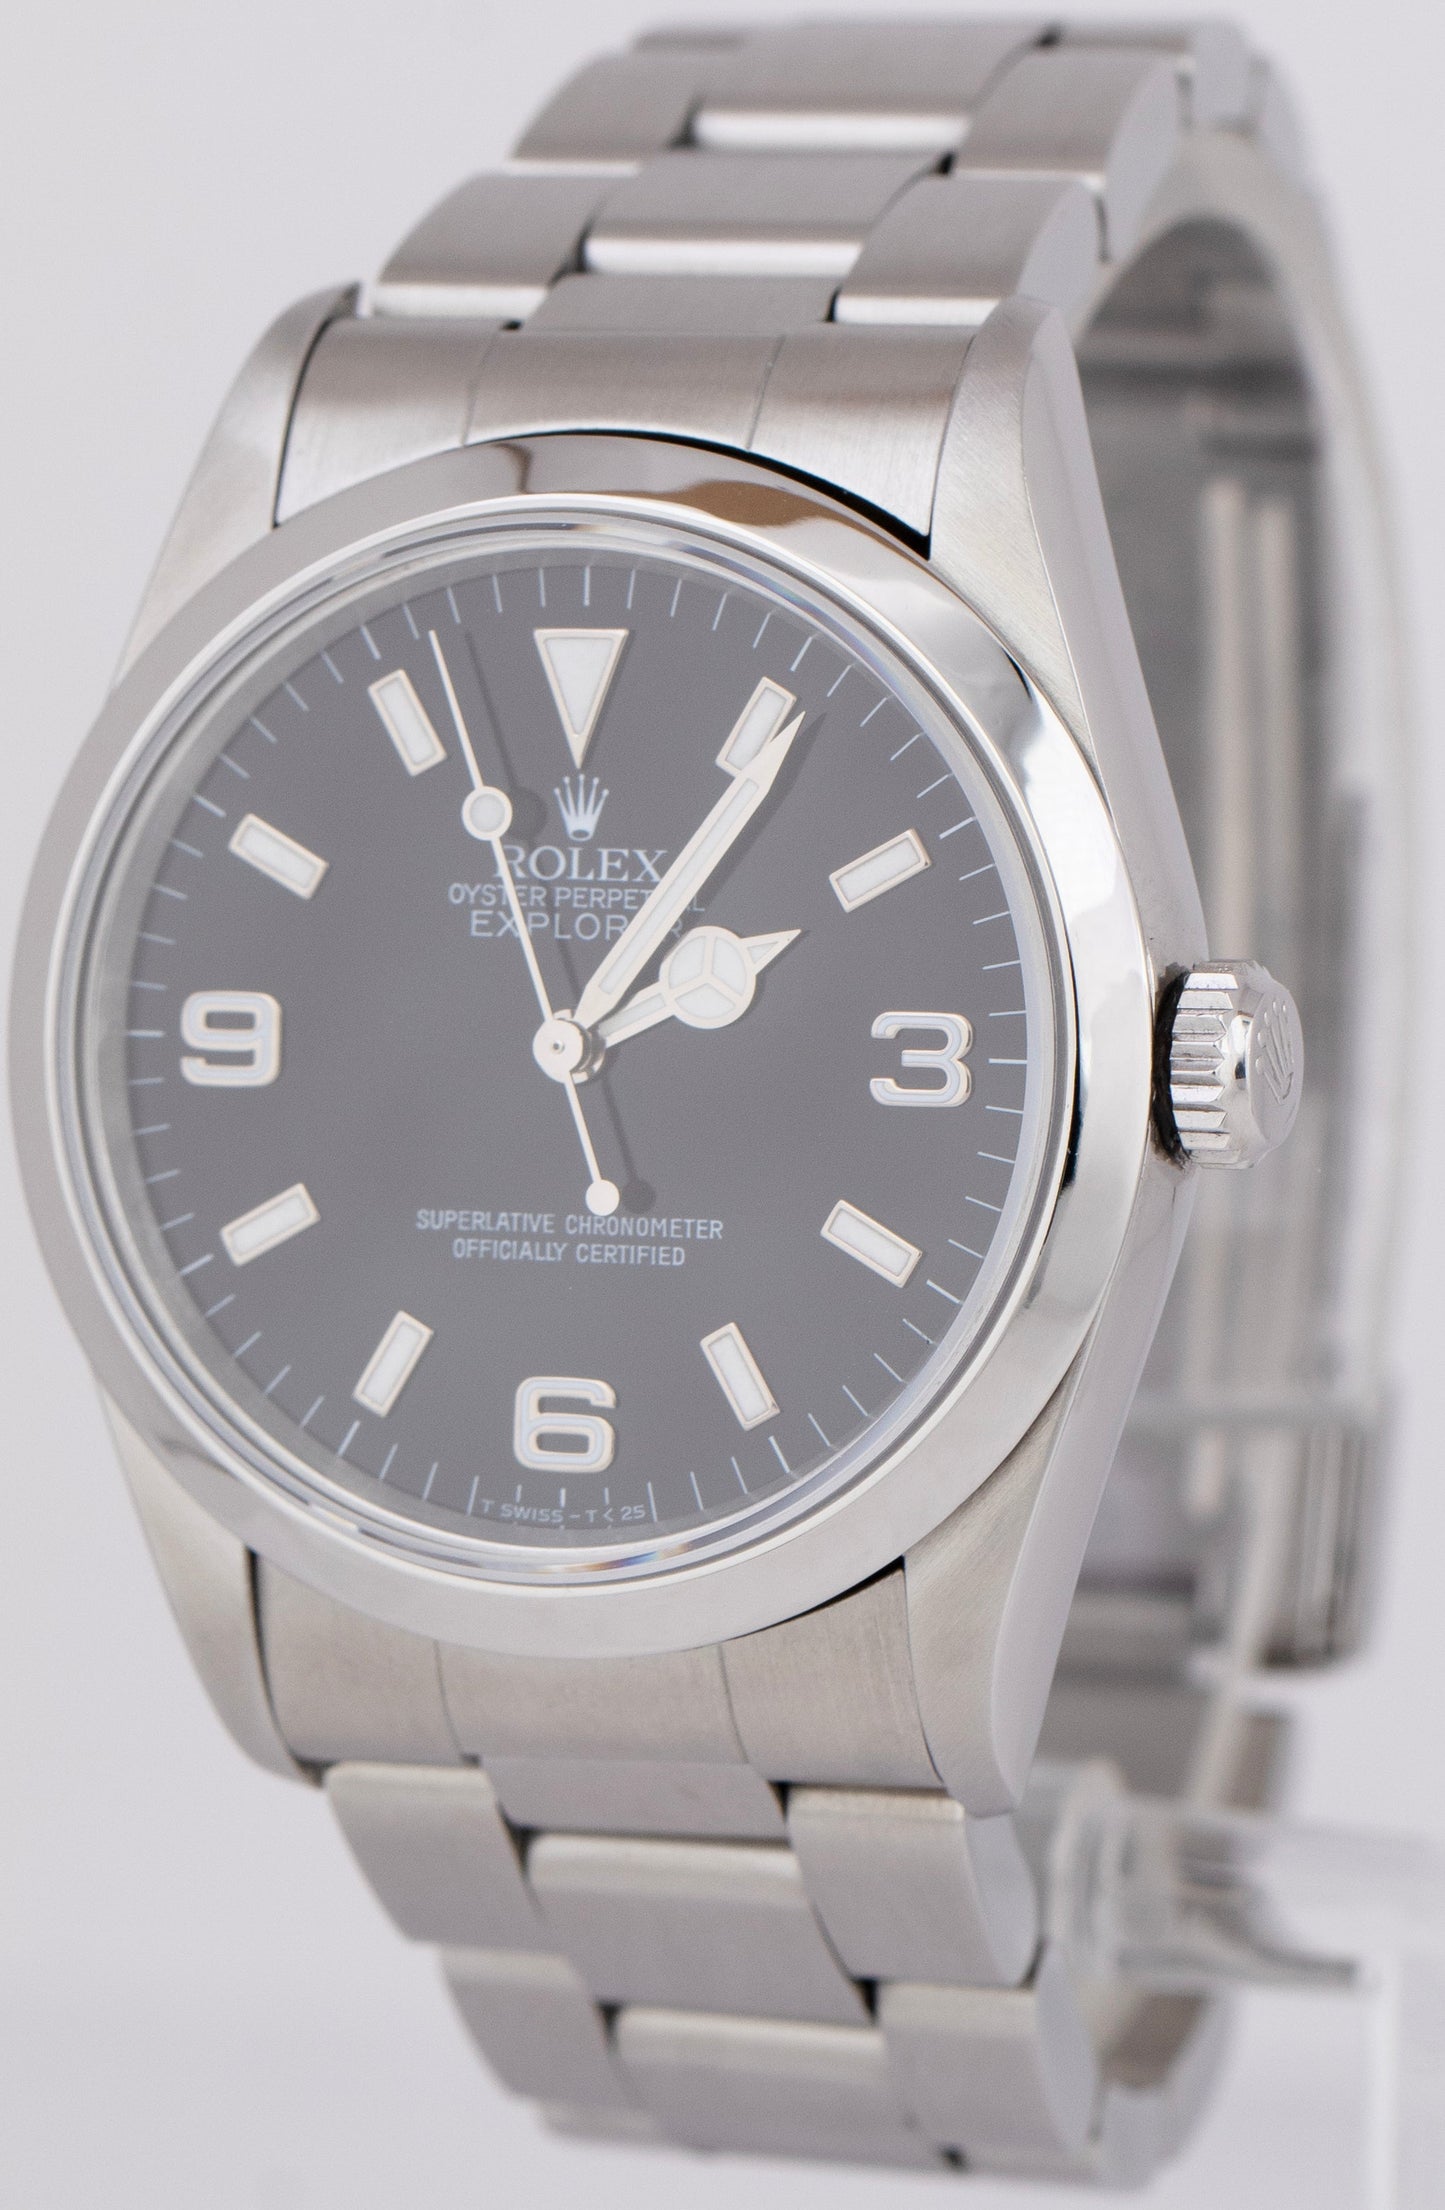 Rolex Explorer I Black 36mm Arabic Stainless Steel Automatic Oyster Watch 14270